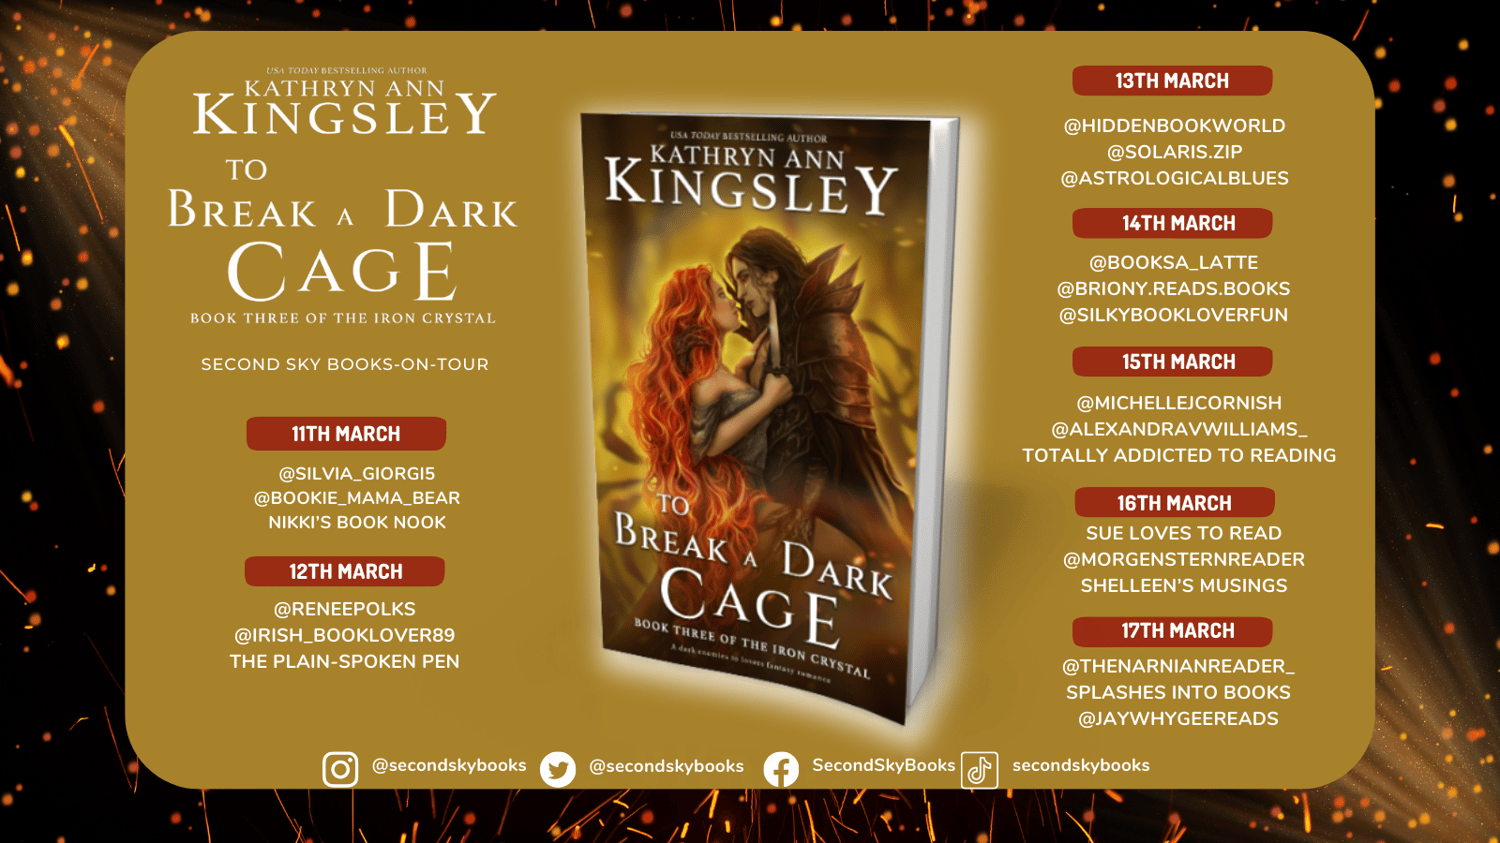 Blog Tour for To Break a Dark Cage by Kathryn Ann Kingsley